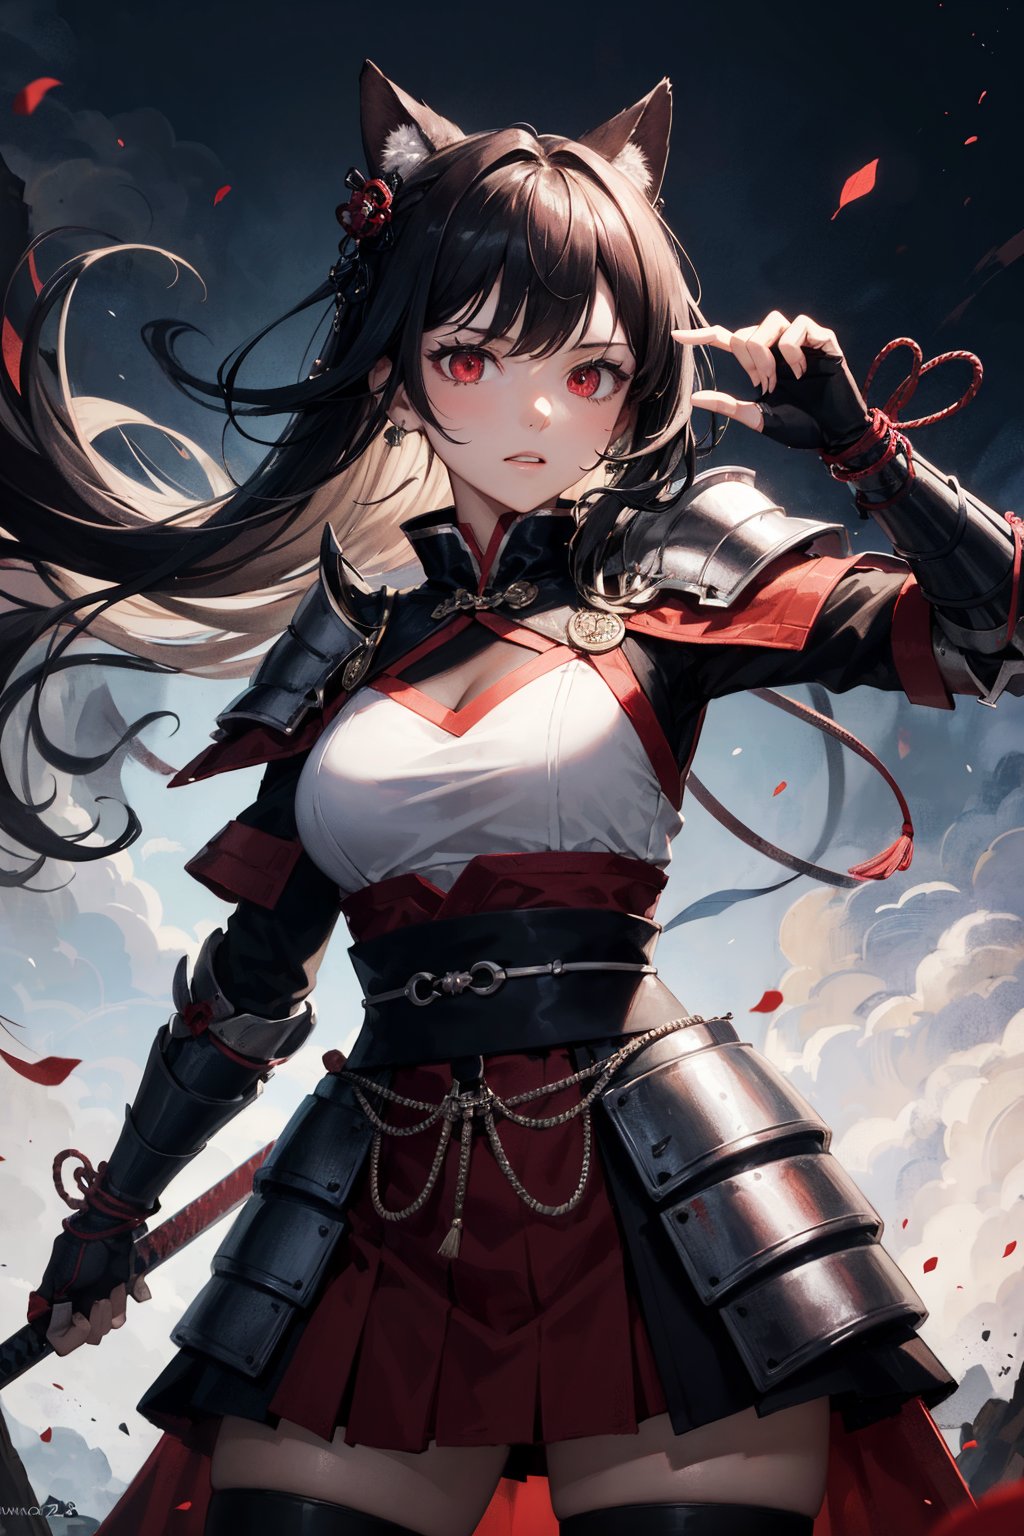 (dinamic pose), (face of a 26 year old girl, body of a 26 year old girl), crimson red eyes, female samurai, armor, skirt, horror style, area lighting